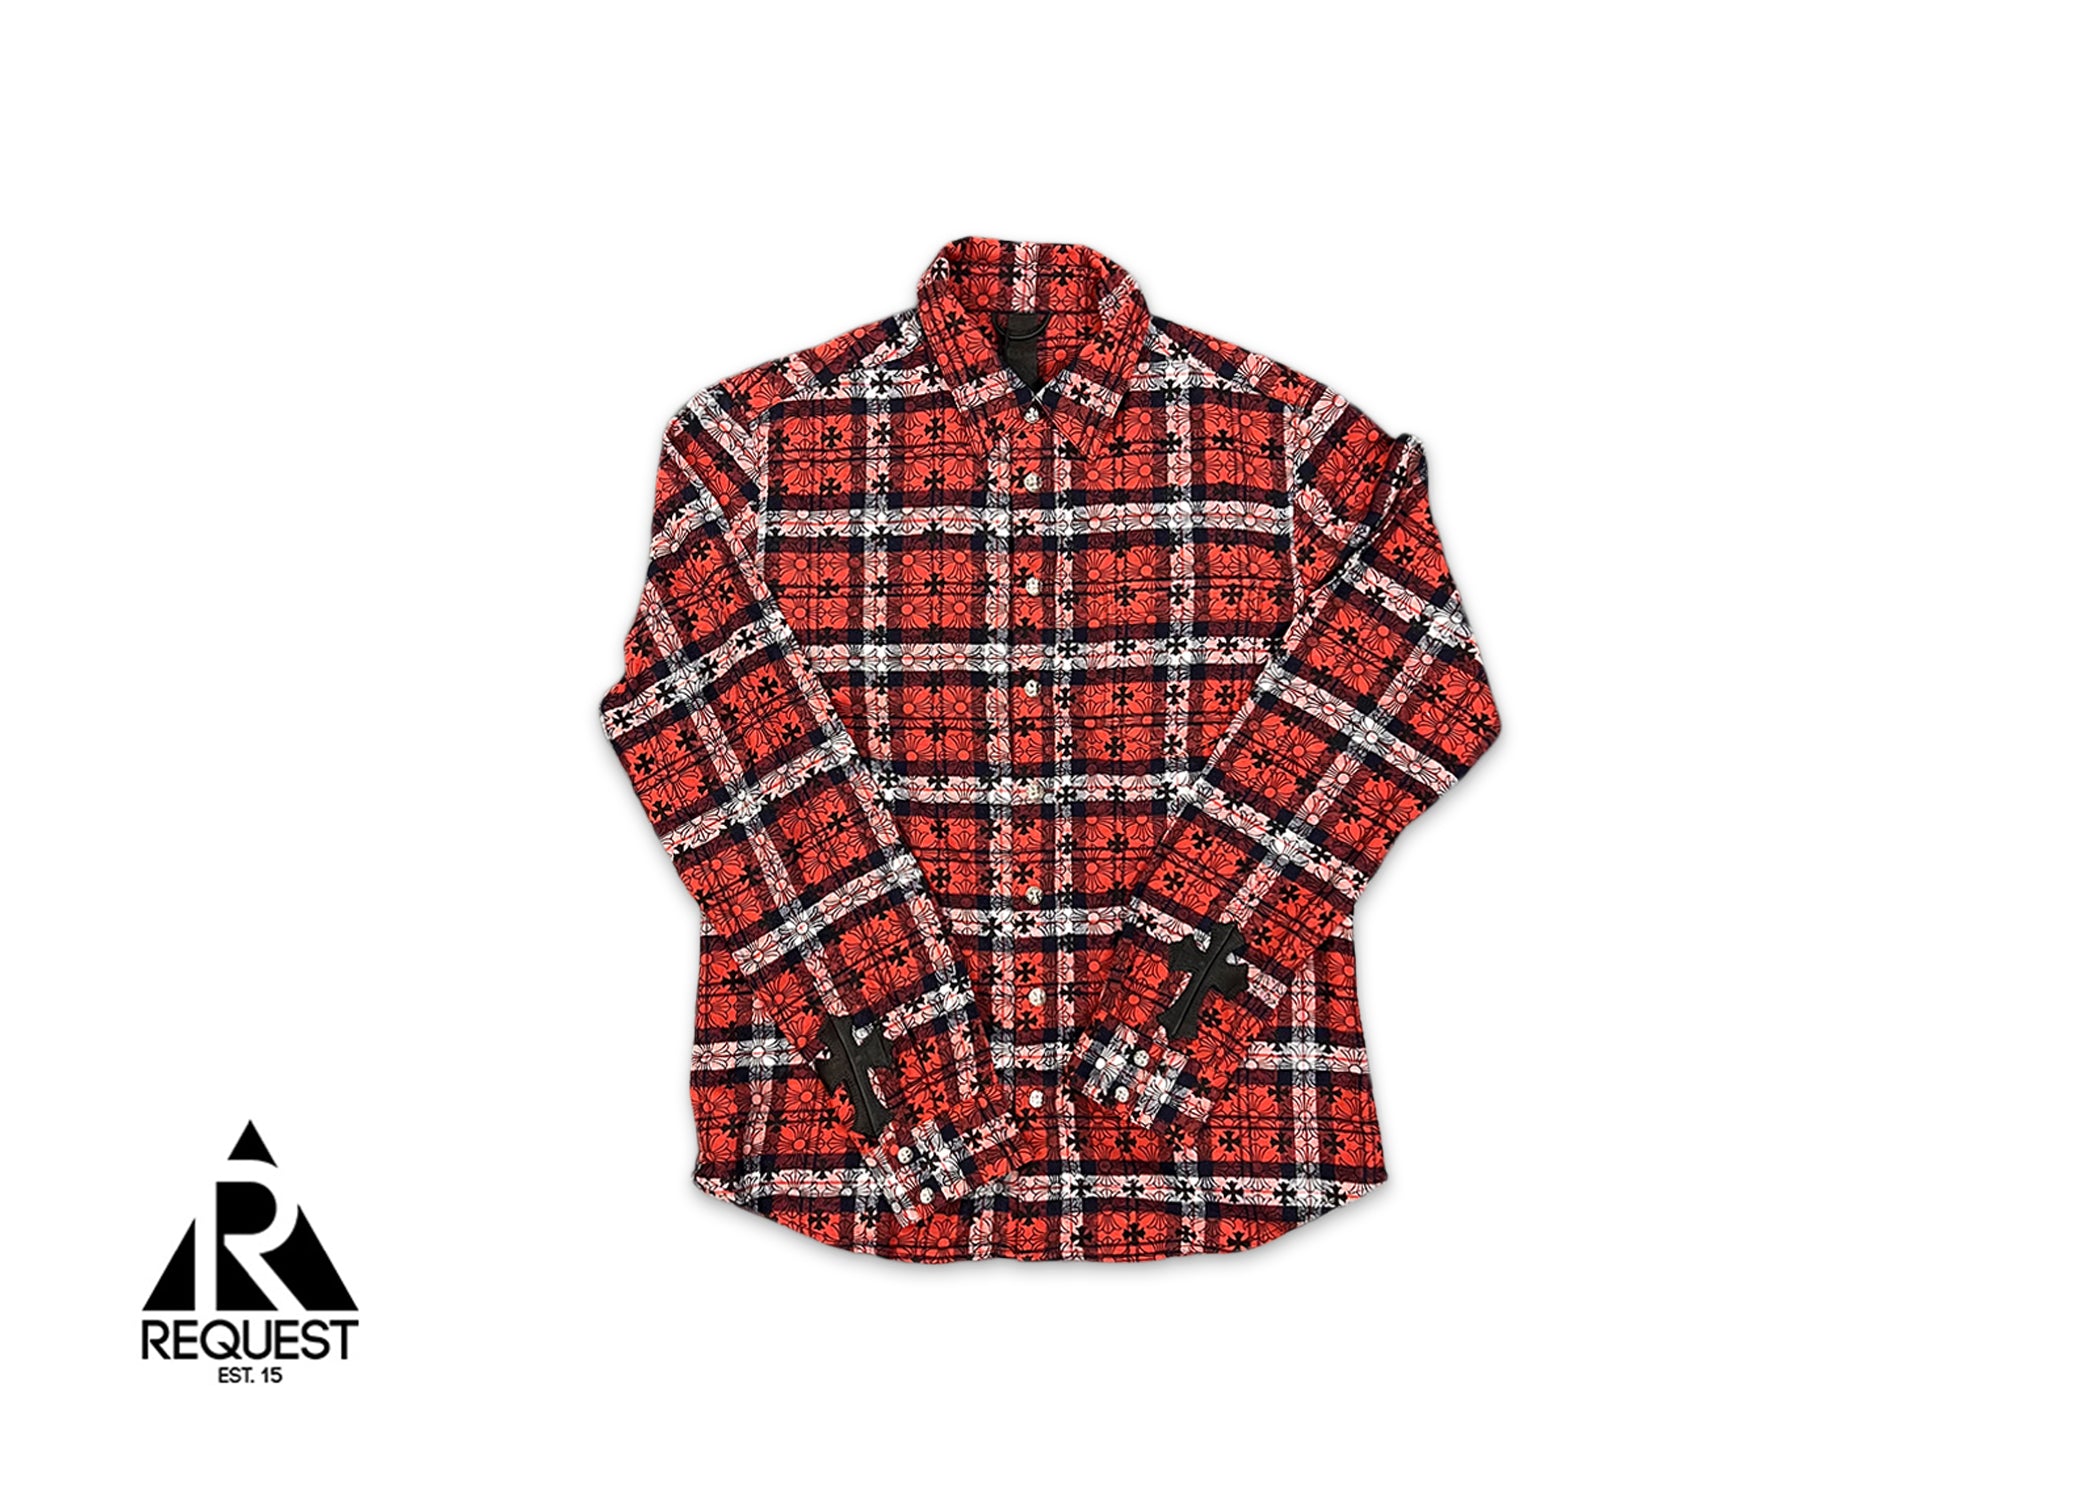 Chrome Hearts Flannel "Red"